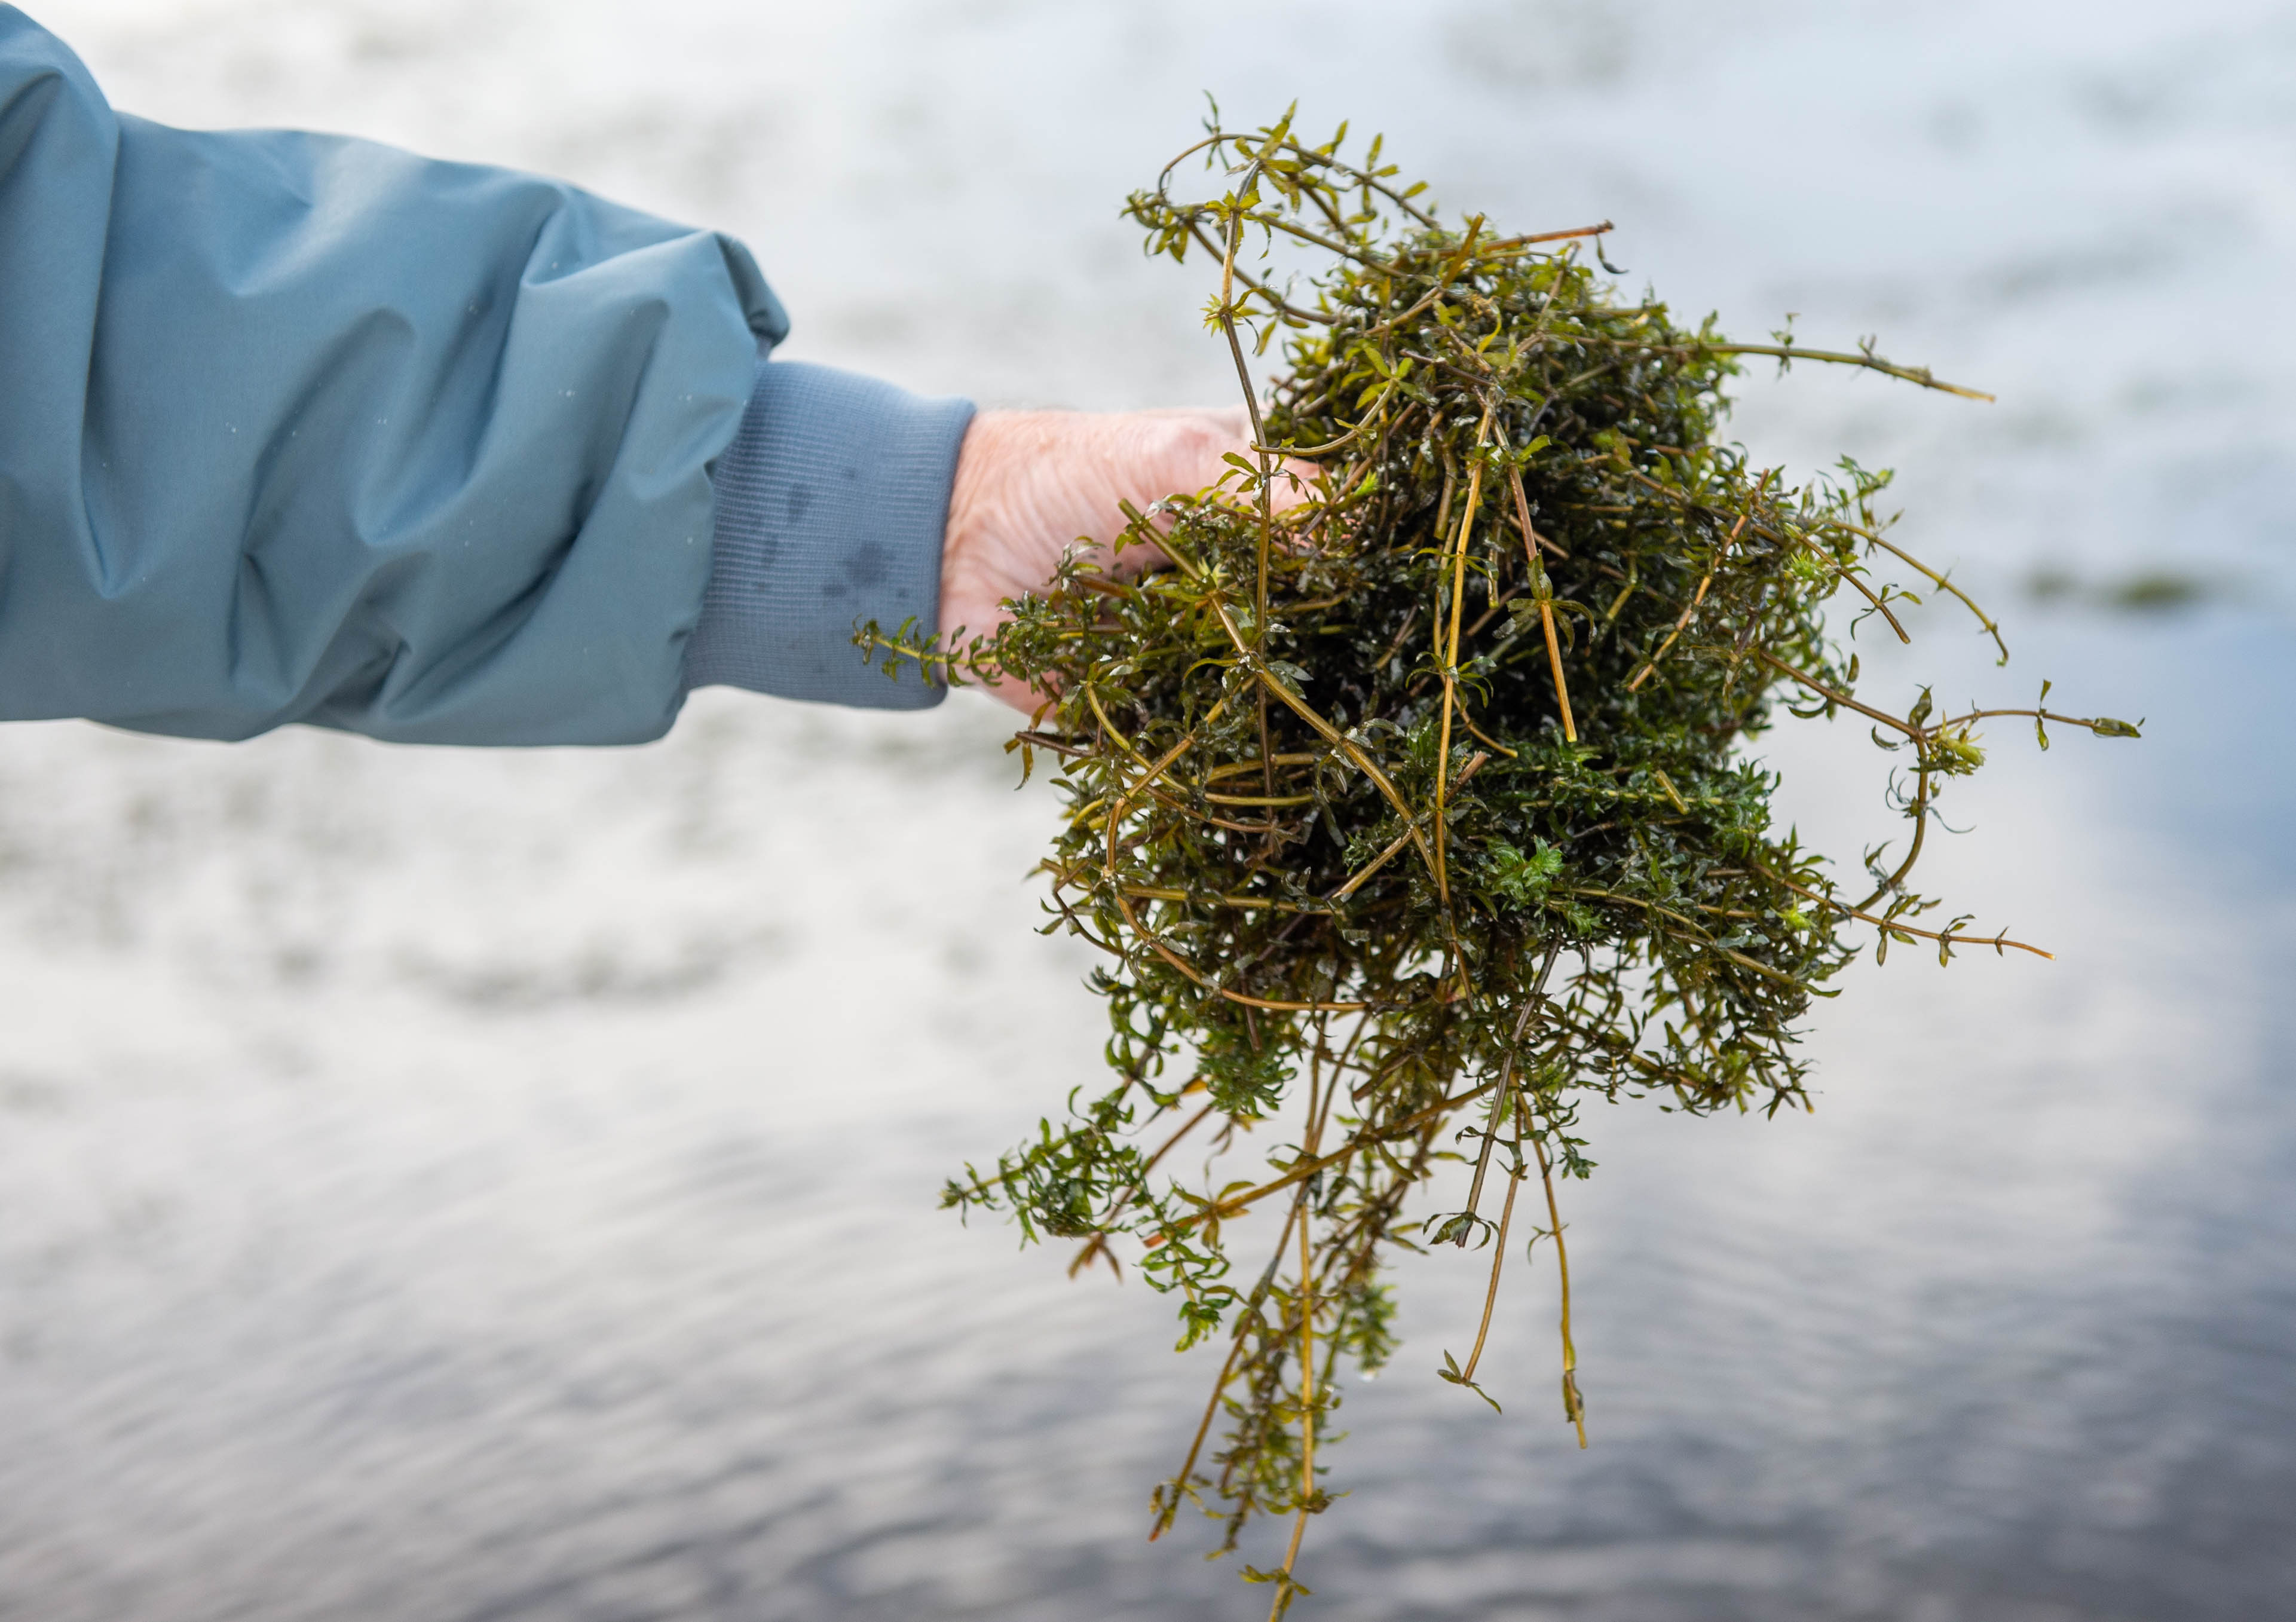 Joe Standart shows some of the invasive plant Hydrilla that is growing in Selden Cove in Lyme on Tuesday, Sept. 26, 2023. Hydrilla has been found along the Connecticut river (Aaron Flaum/Hartford Courant)